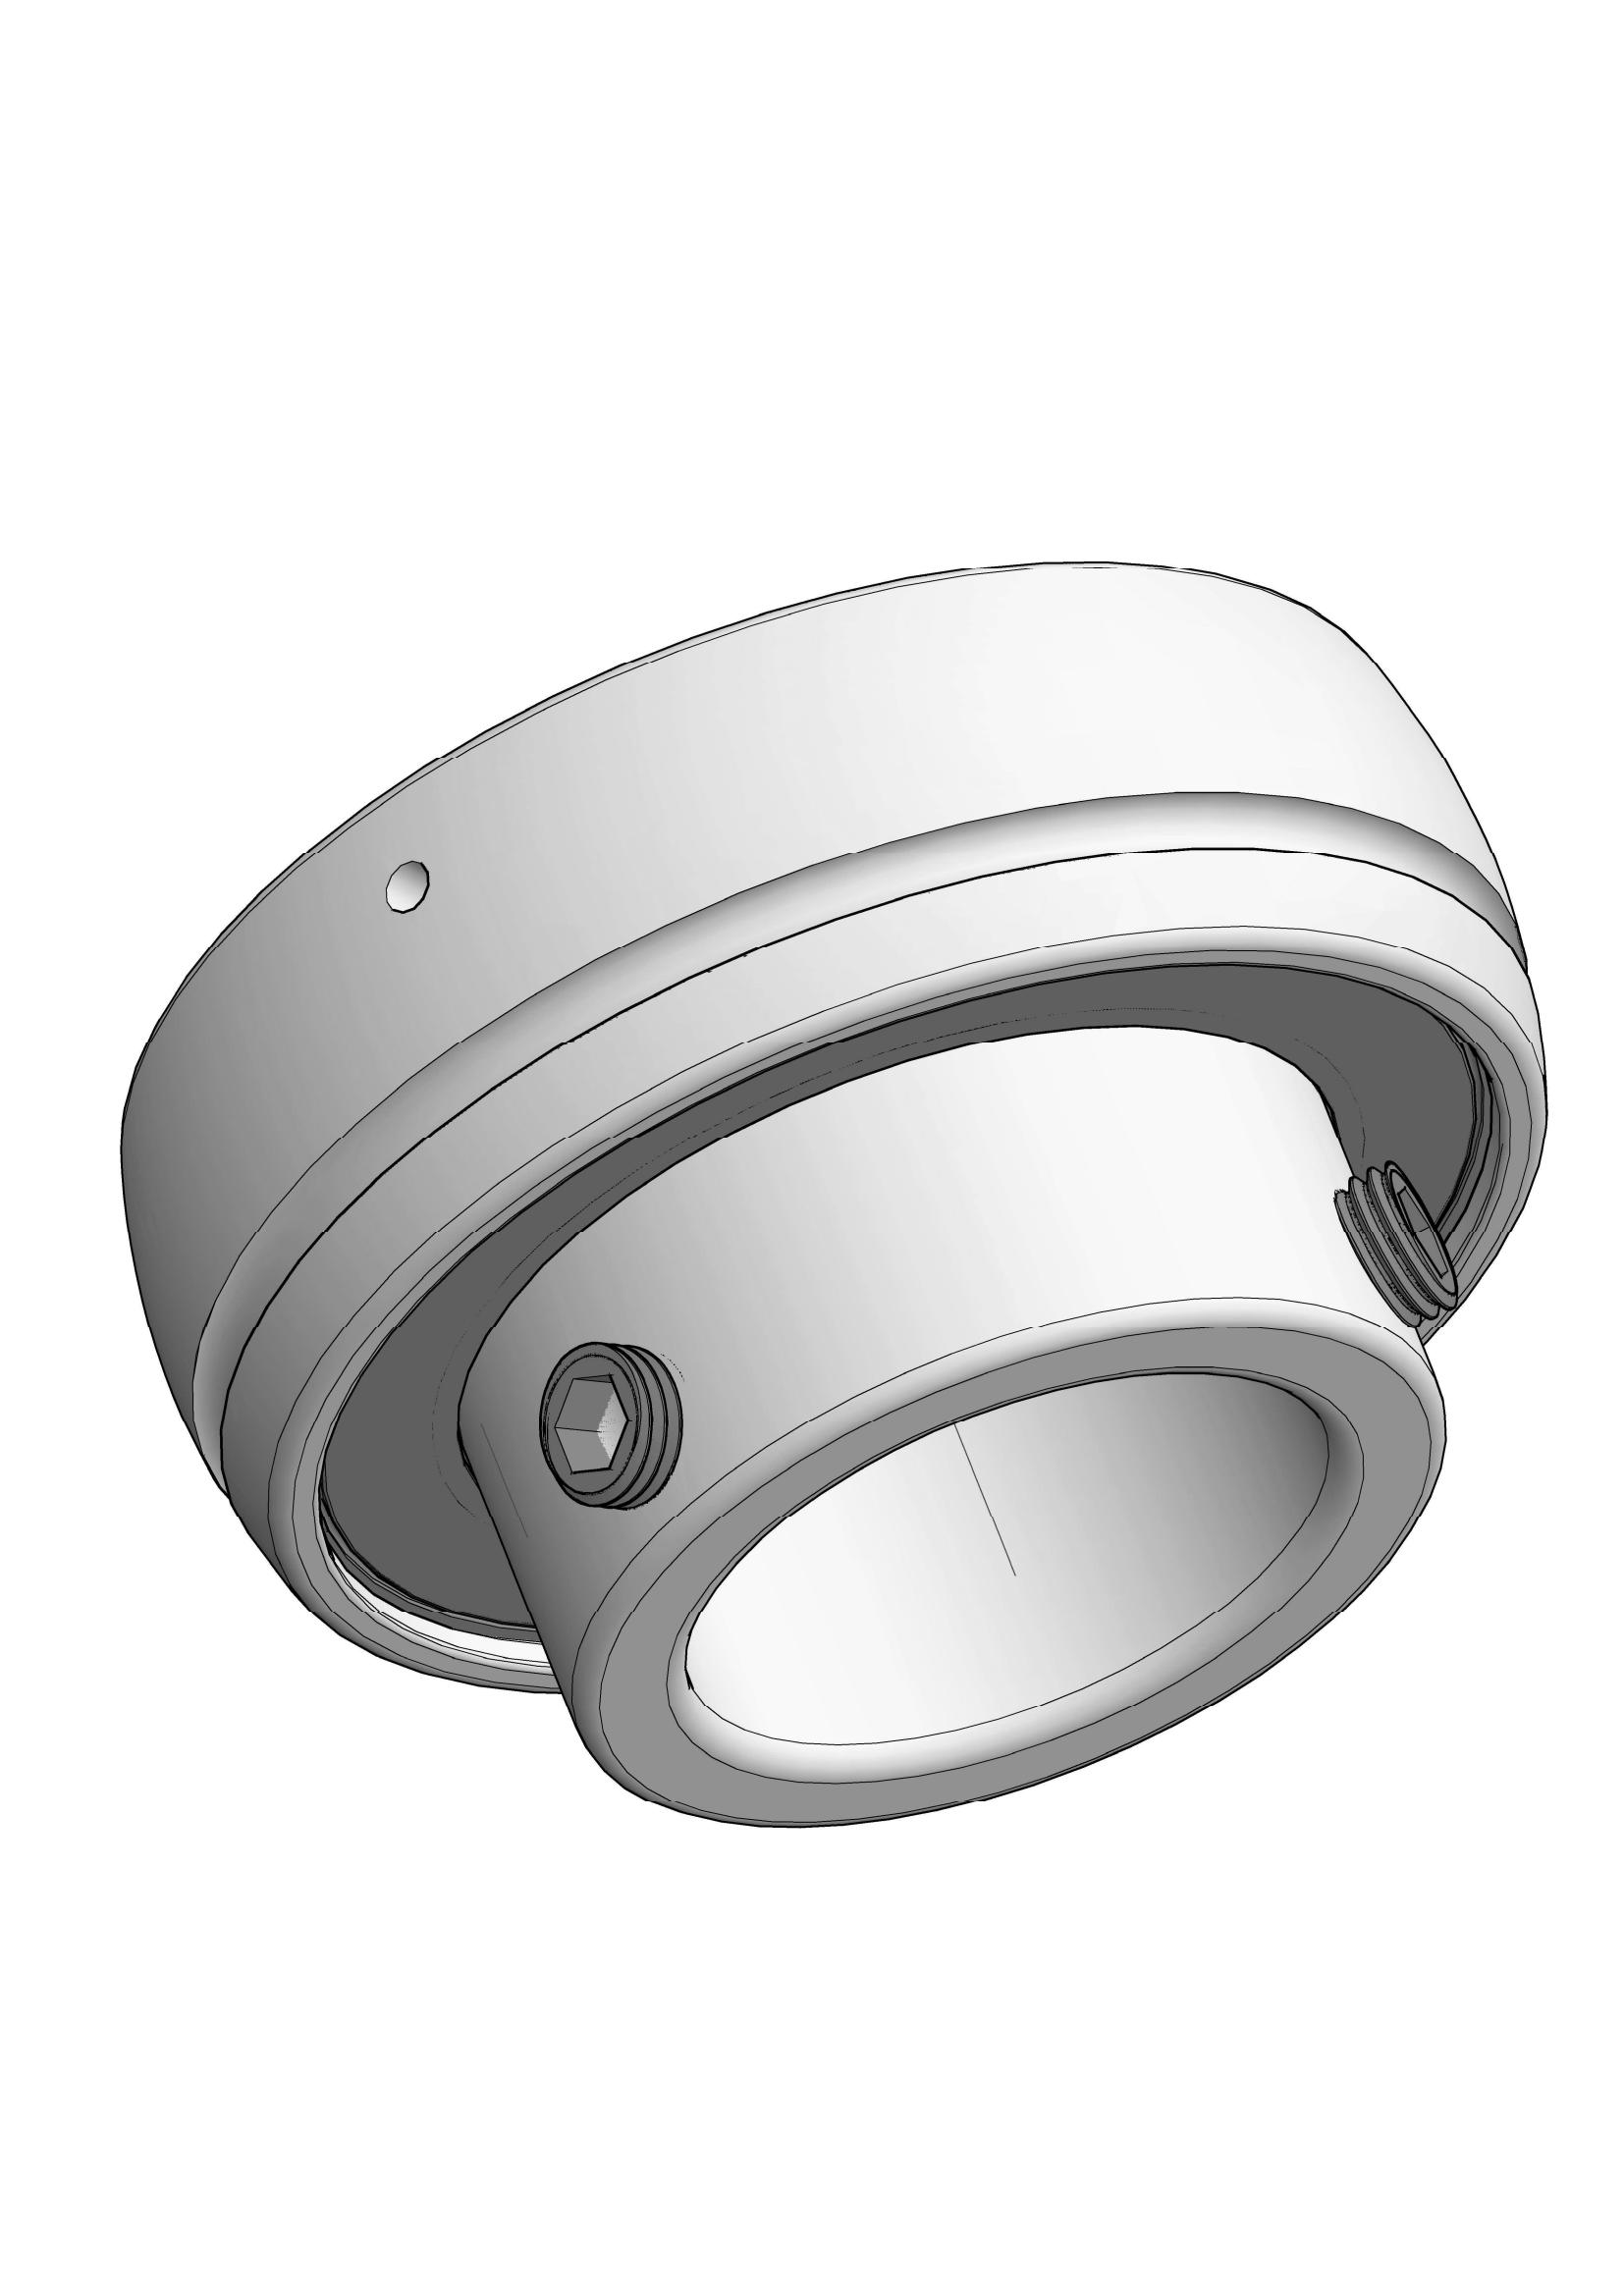 SB212-38 insert ball bearings with Eccentric Collar Lock with 2-3/8 inch Bore